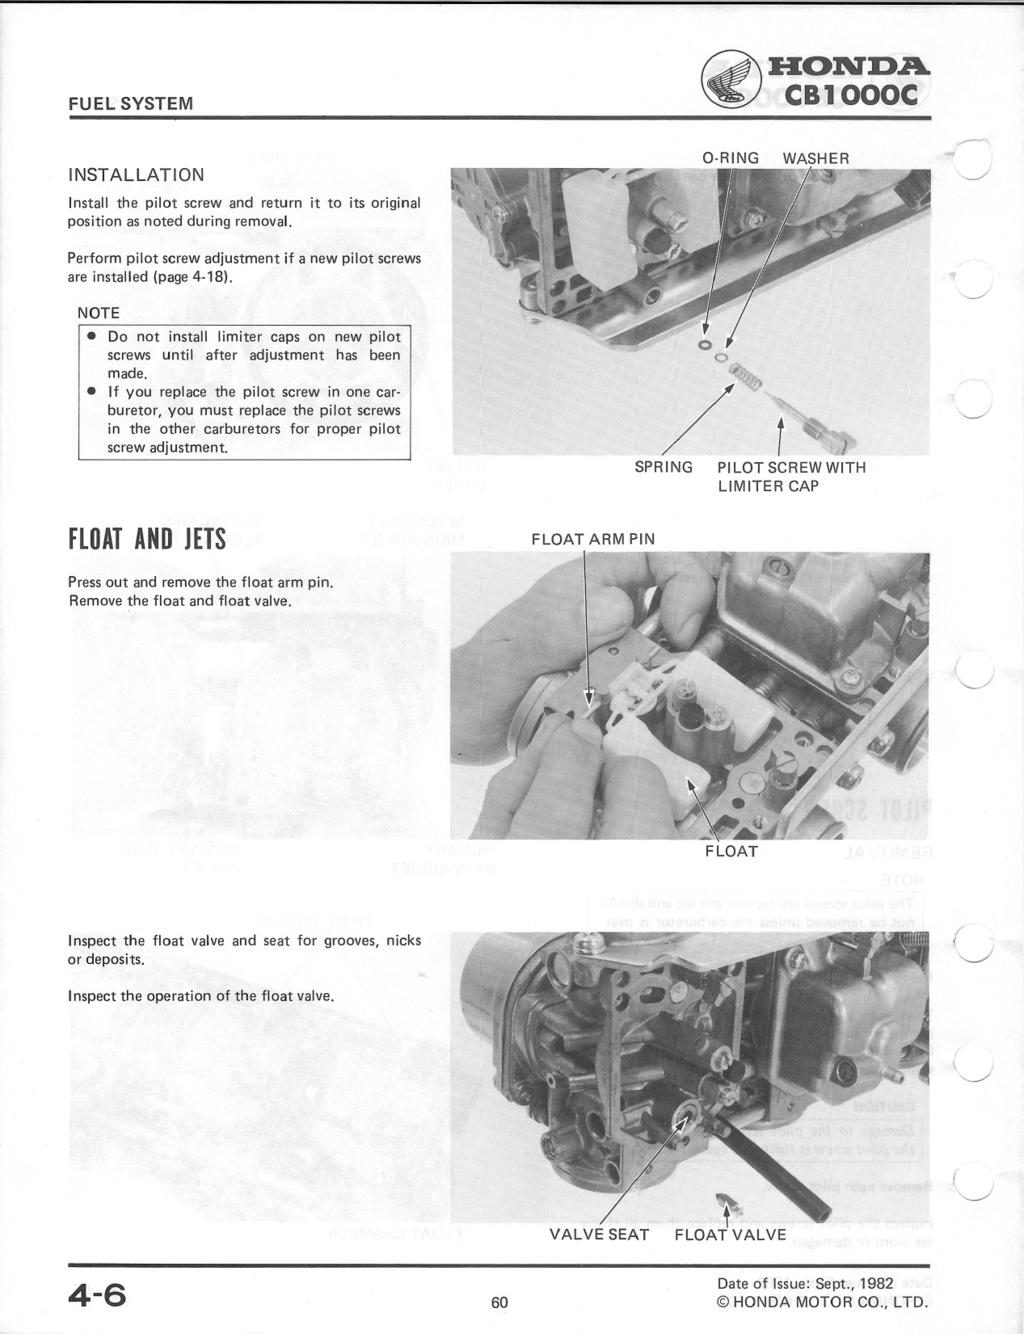 FUEL SYSTEM ~HOND.A~ CB1000C INSTAllATION Install the pilot screw and return it to its original position as noted during removal.